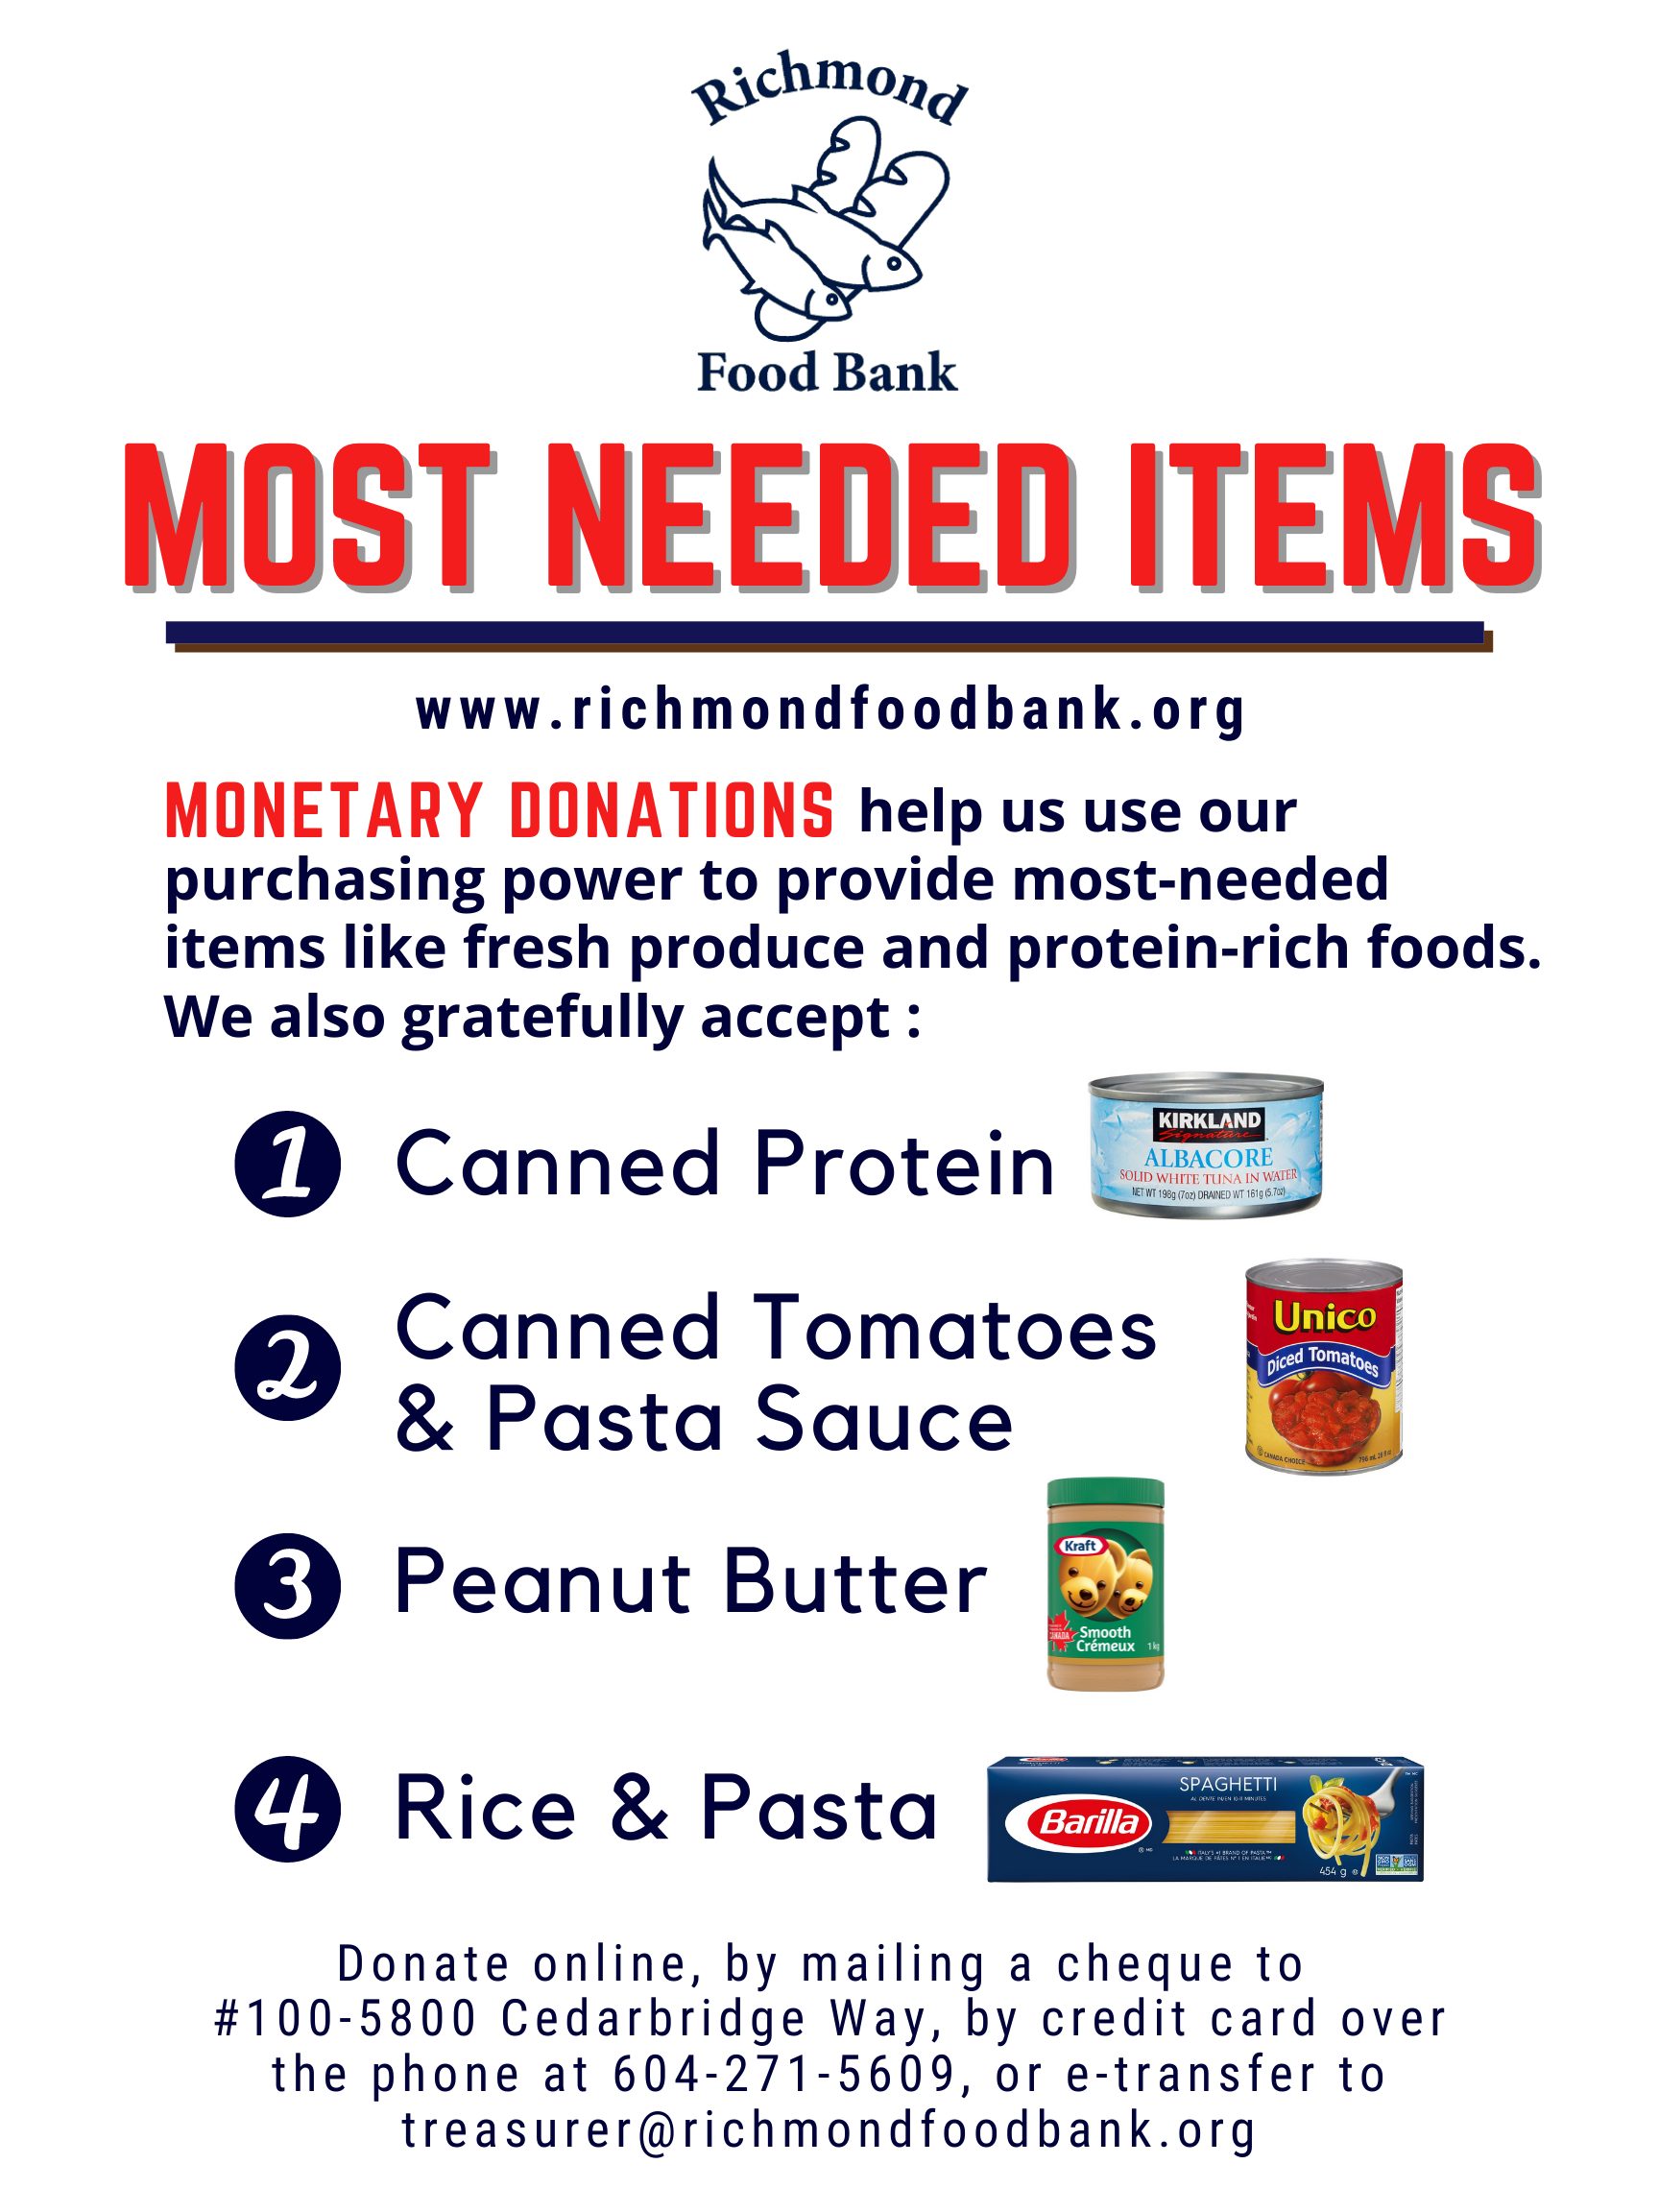 https://richmondfoodbank.org/wp-content/uploads/2018/04/Most-Needed-Items-Poster-1.jpg